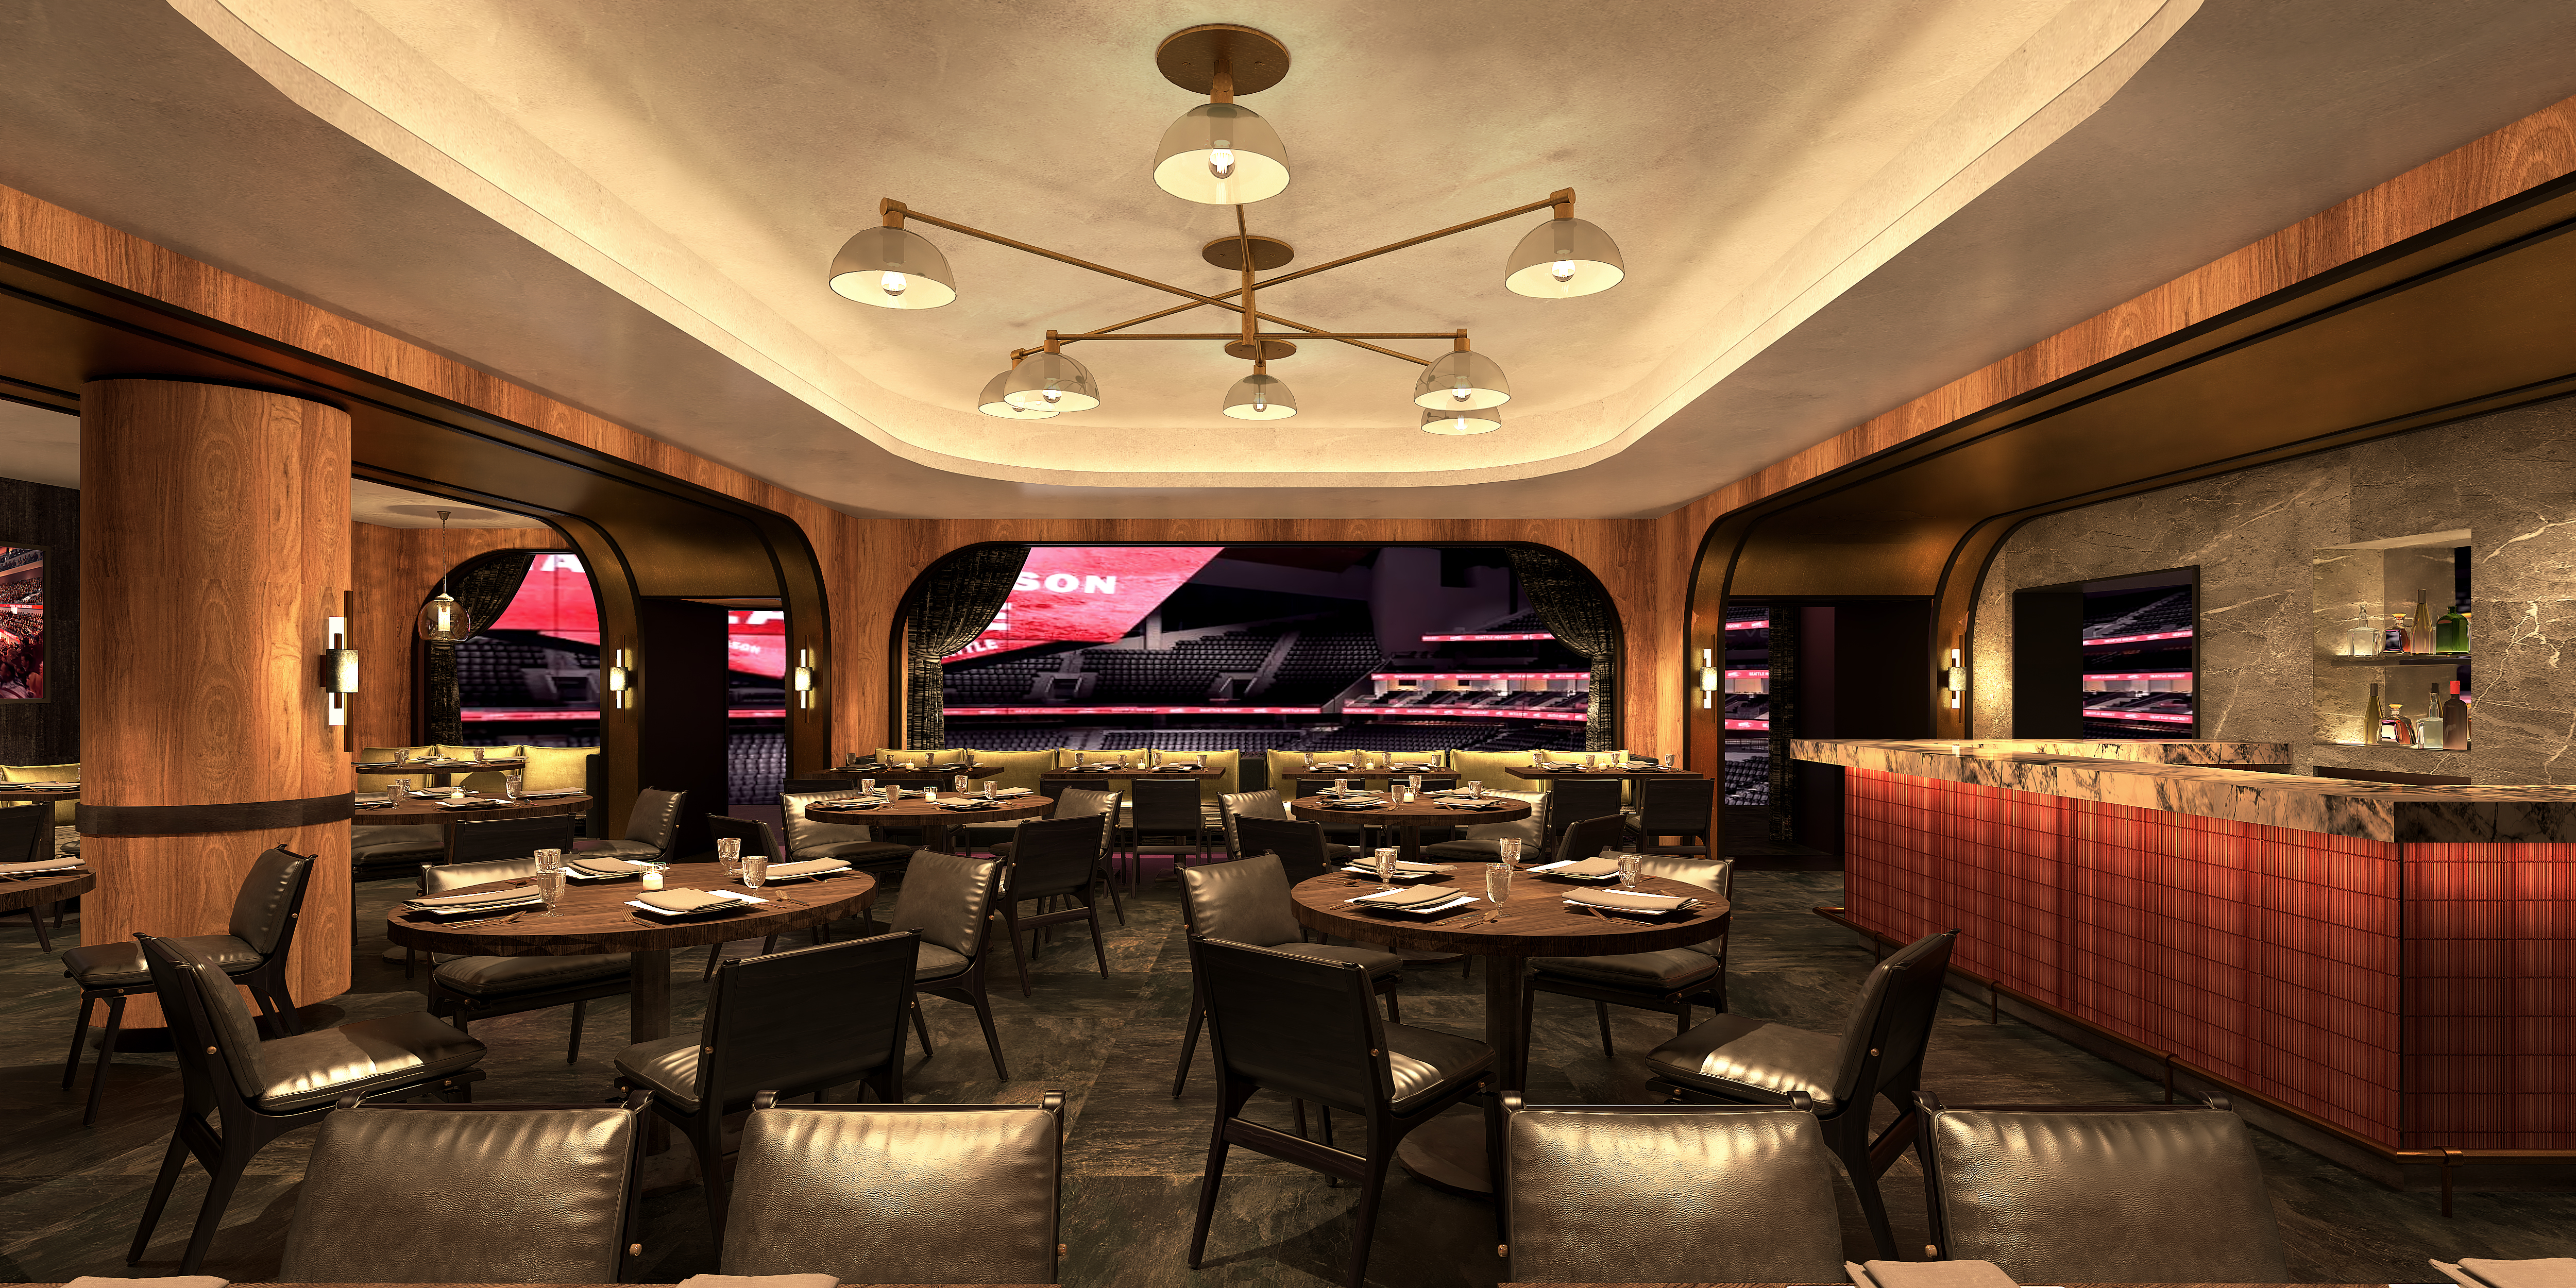 A rendering for the Metropolitan Club at the New Arena at Seattle Center shows dark wood finishings and some tables looking out onto the rink.